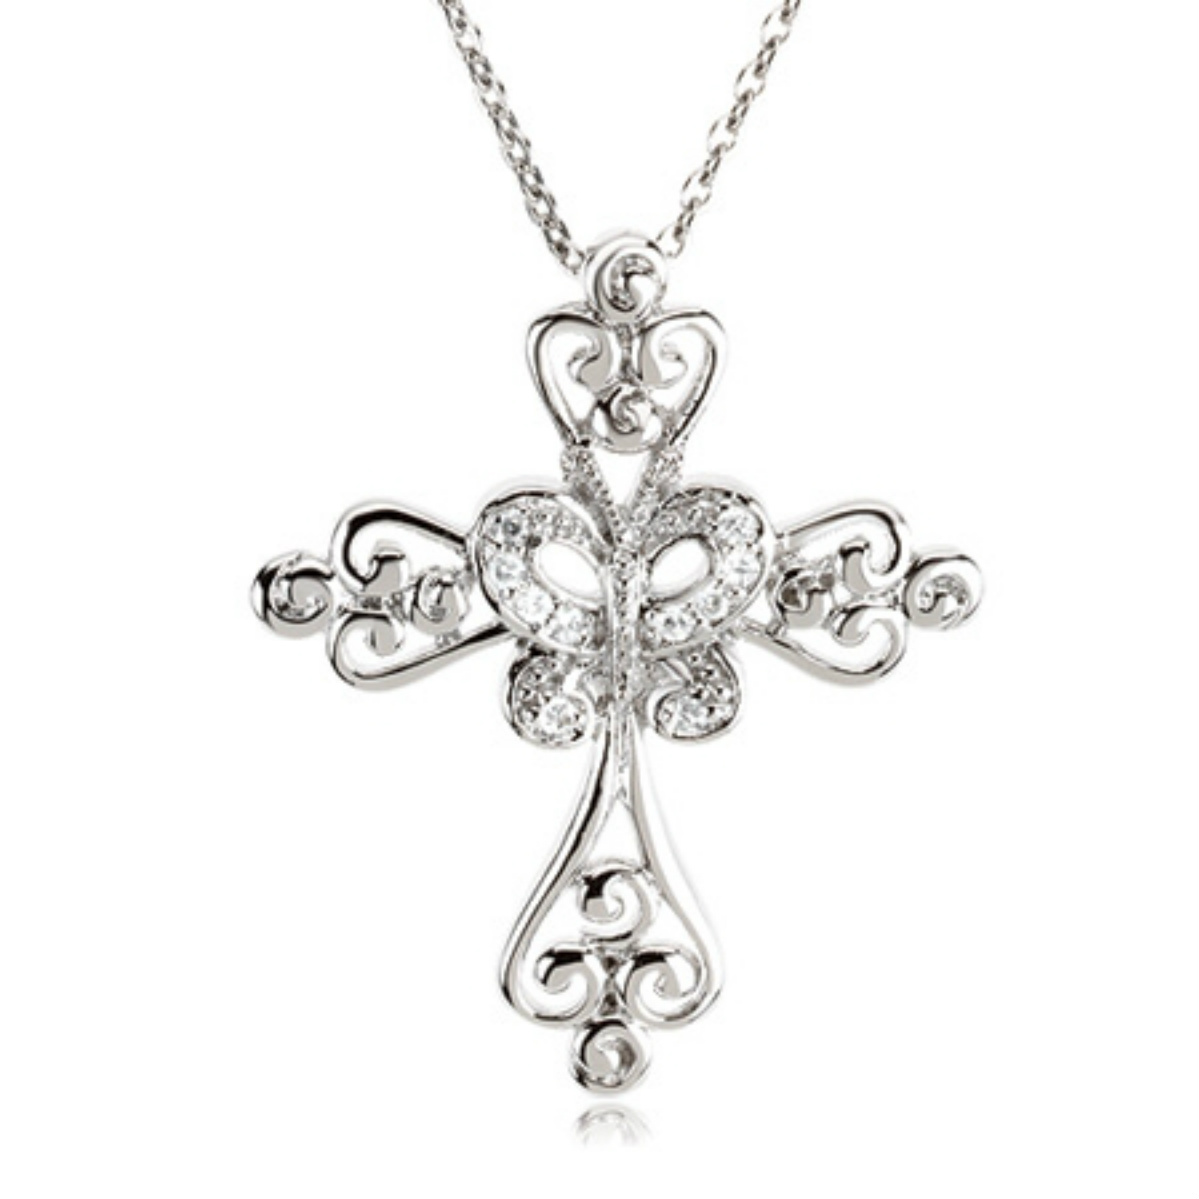 CZ 'New Creation in Christ' Rhodium Plate Sterling Silver Cross Pendant Necklace.